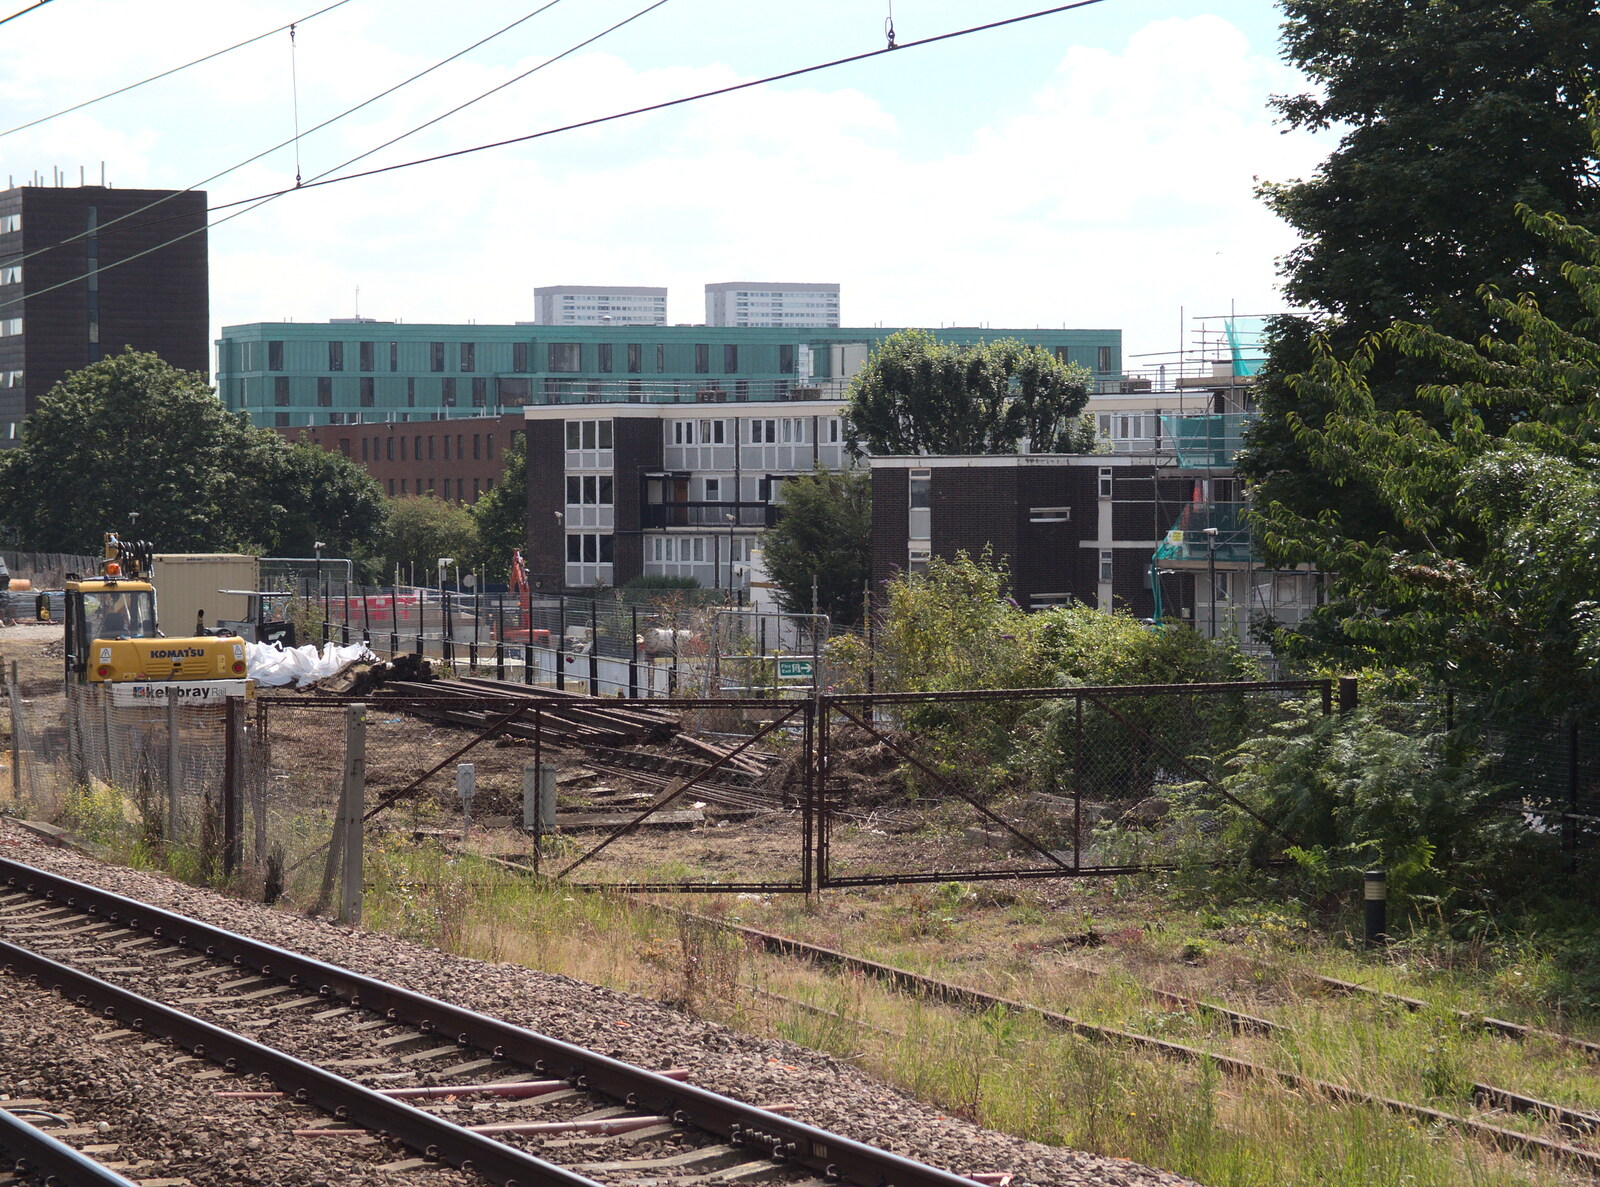 A pile of dereliction by the railway line from A Trip to Pizza Pub, Great Suffolk Street, Southwark - 8th July 2014